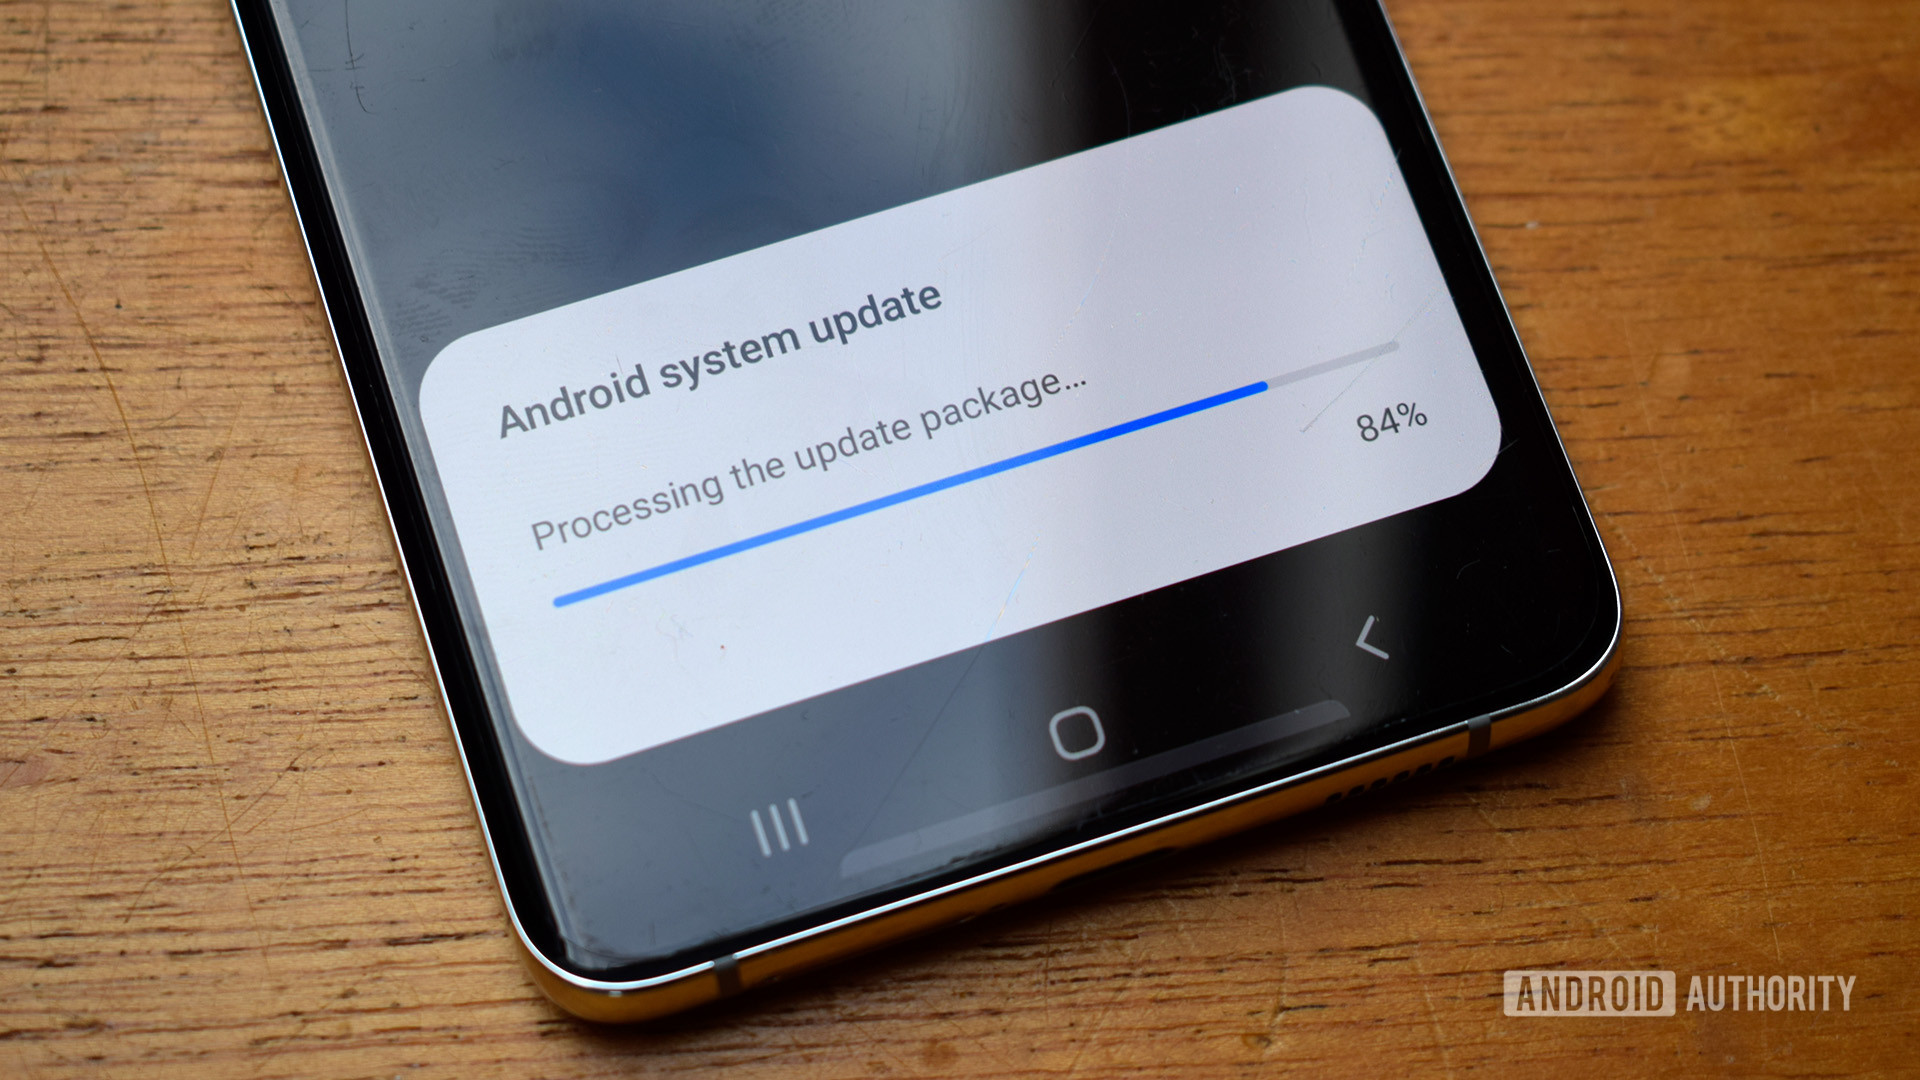 Android update installing